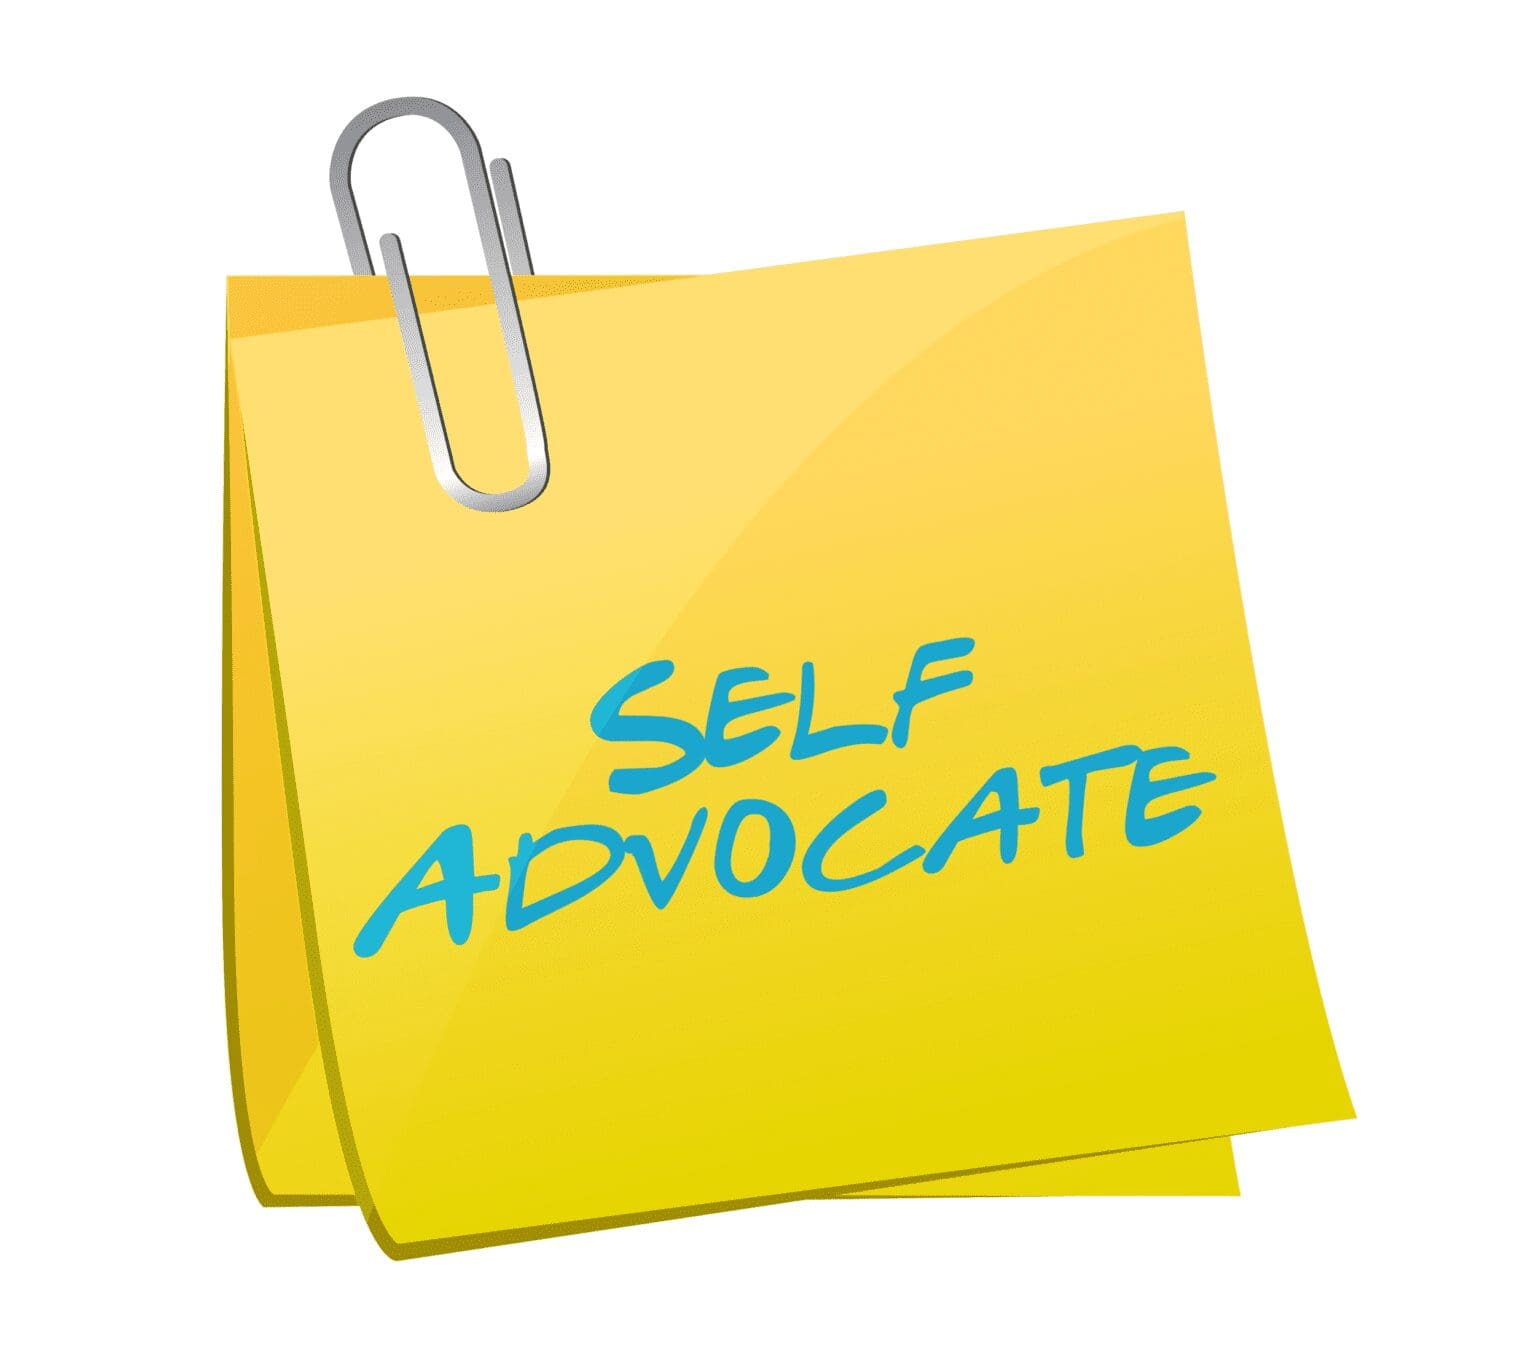 A yellow note with words “SELF ADVOCATE”